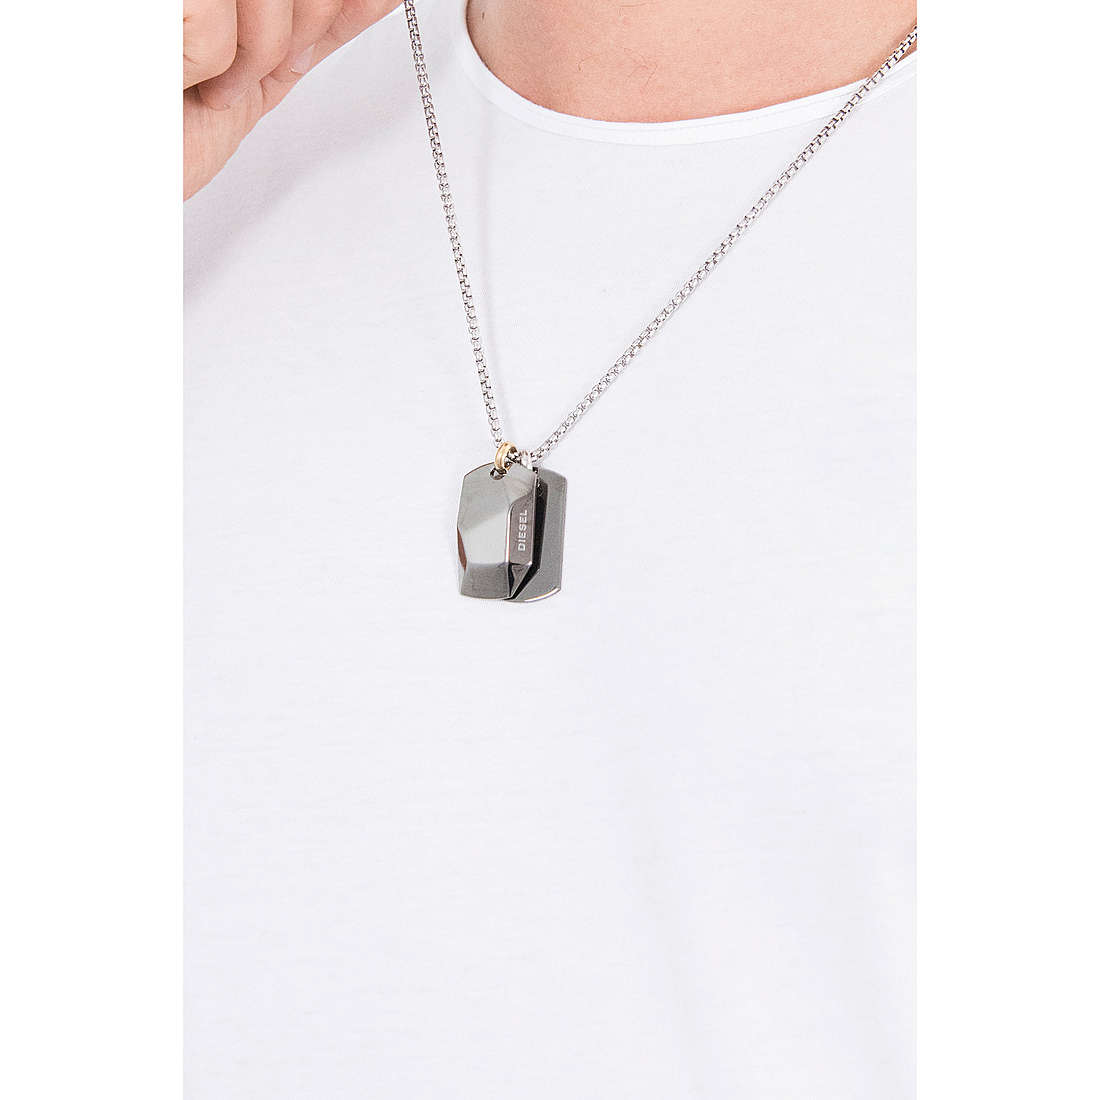 Diesel necklaces Double Dogtags man DX1143040 wearing